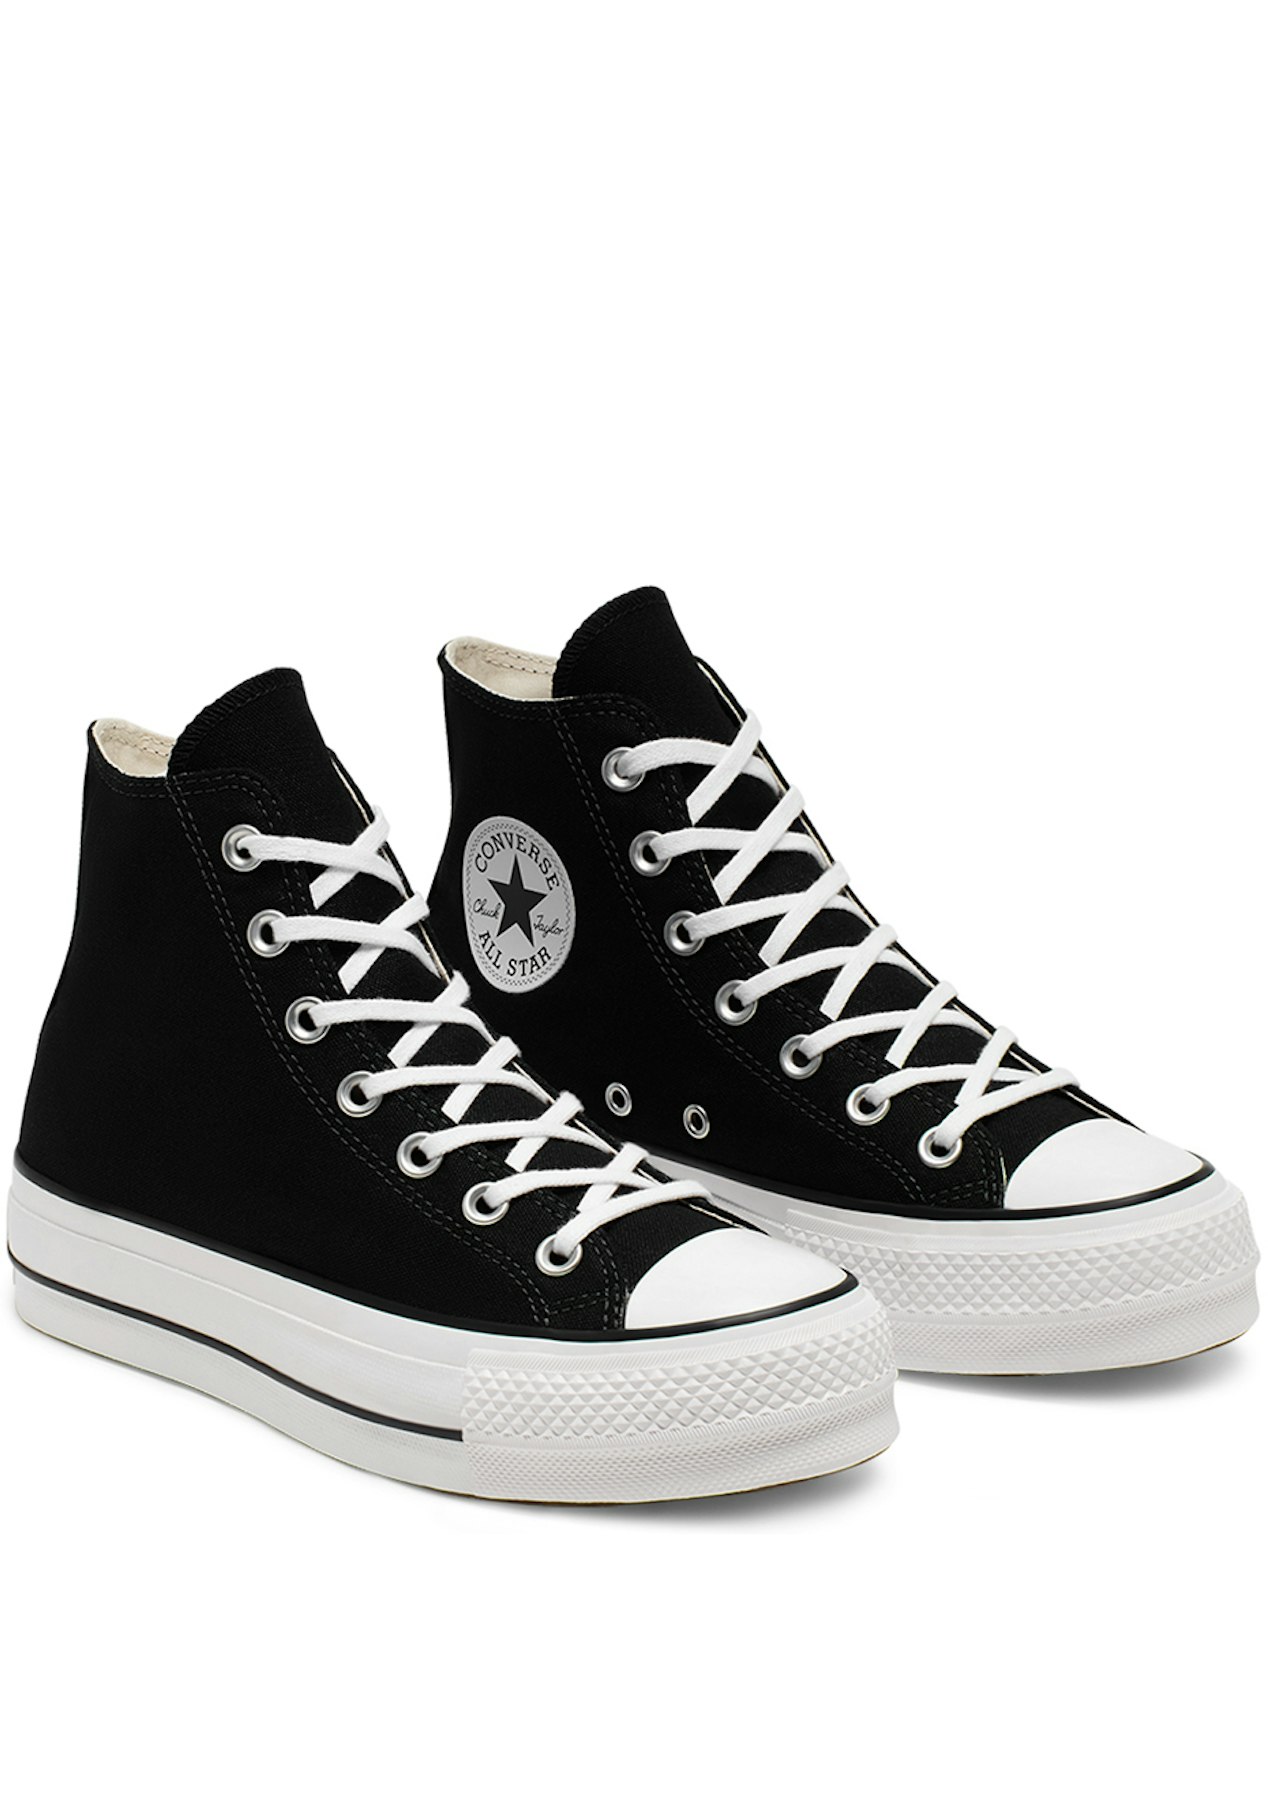 Converse - Womens Chuck Taylor All Star Platform Canvas High Top Sneaker -  Black/White/White - Onceit